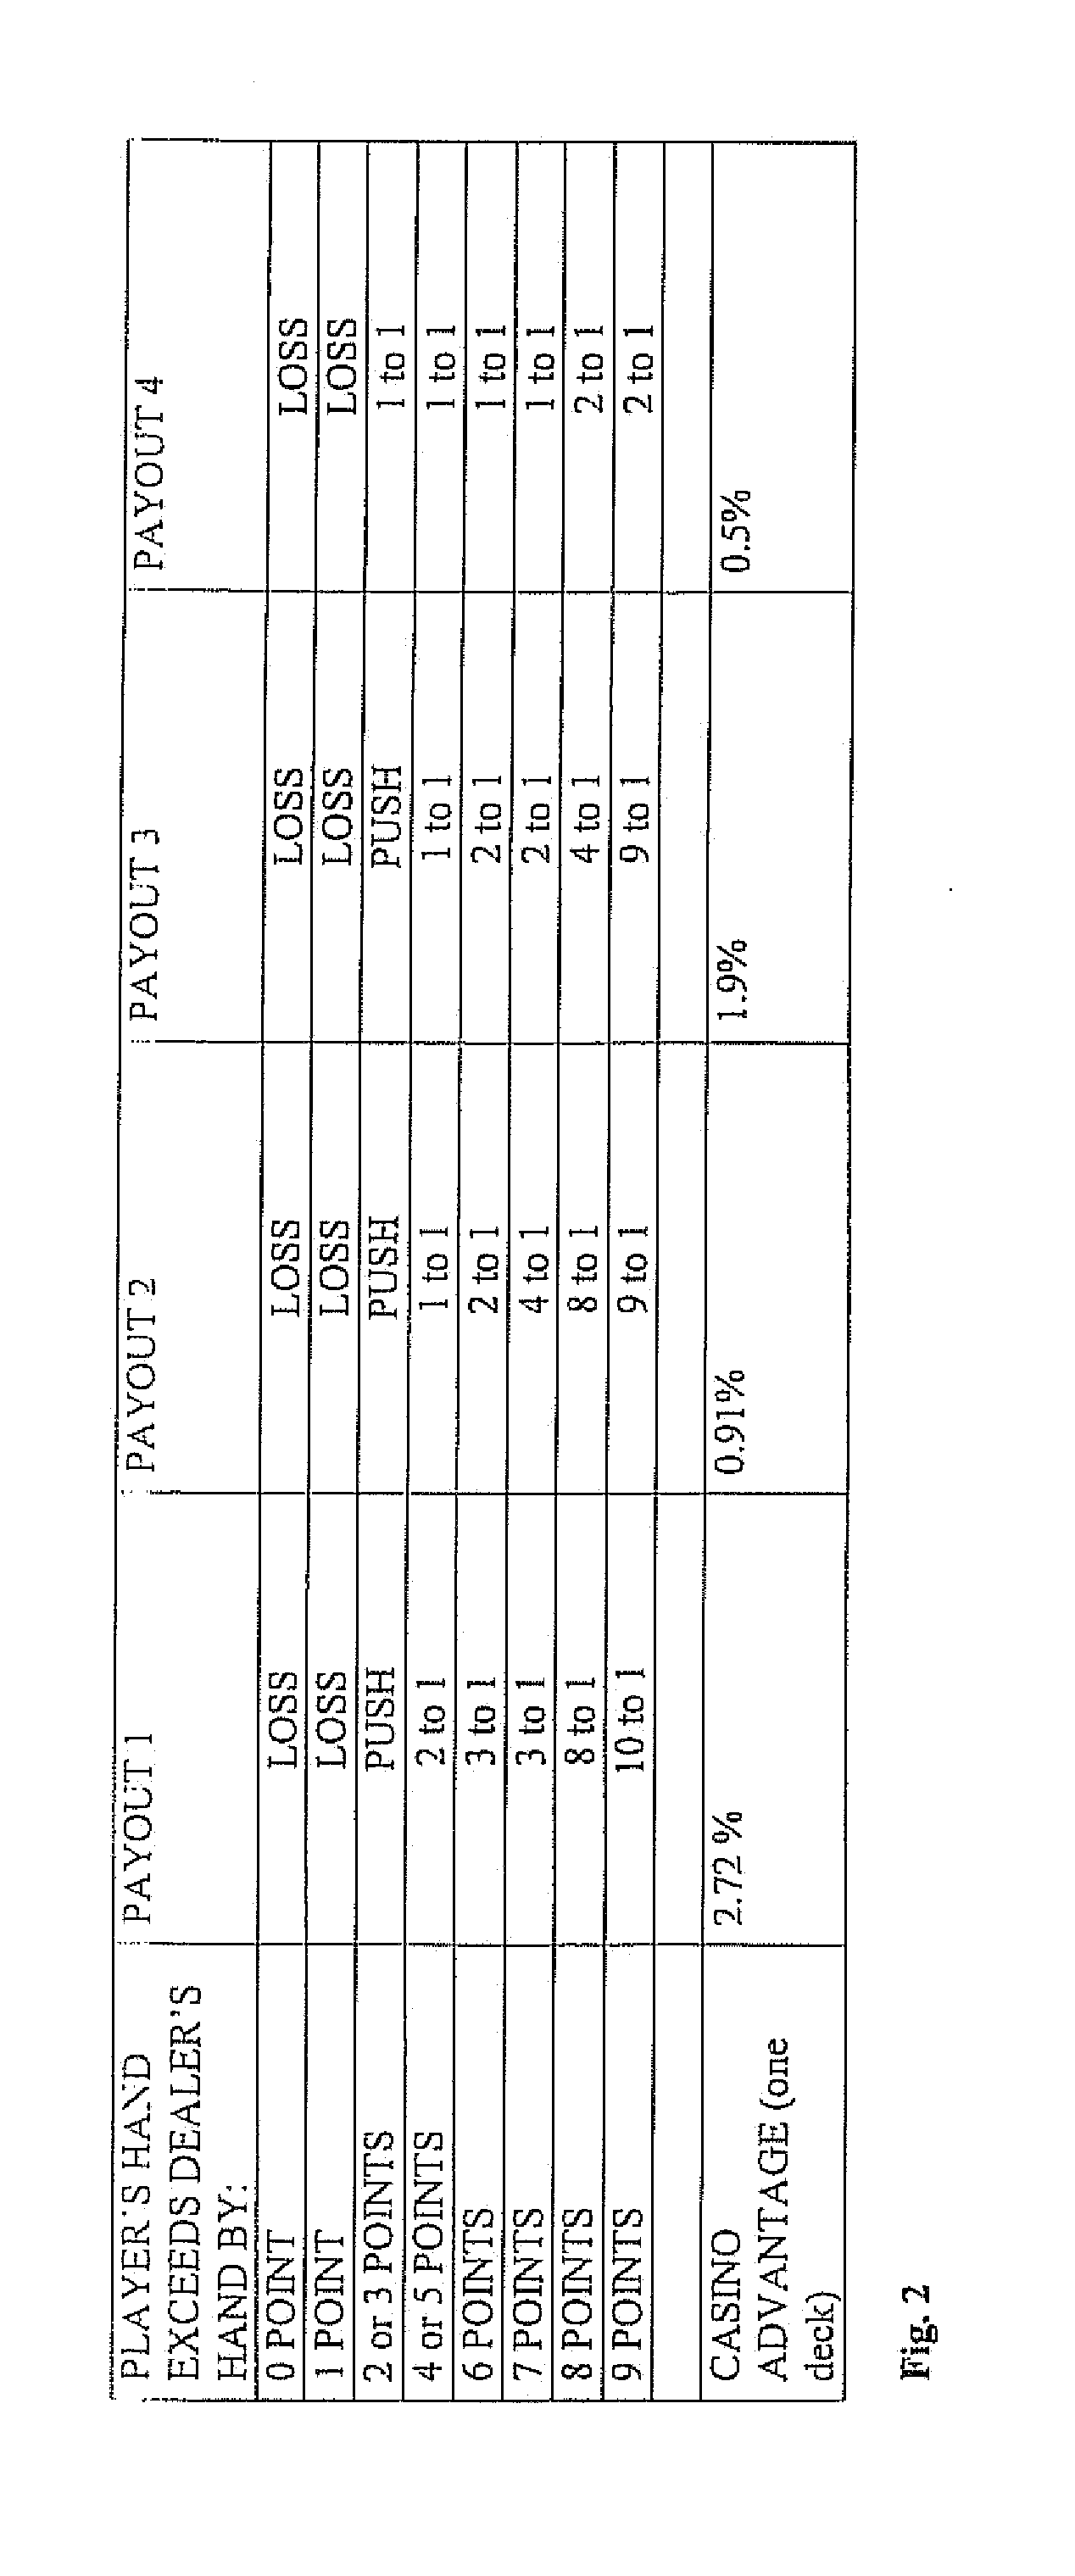 Method and apparatus for playing a wagering card game